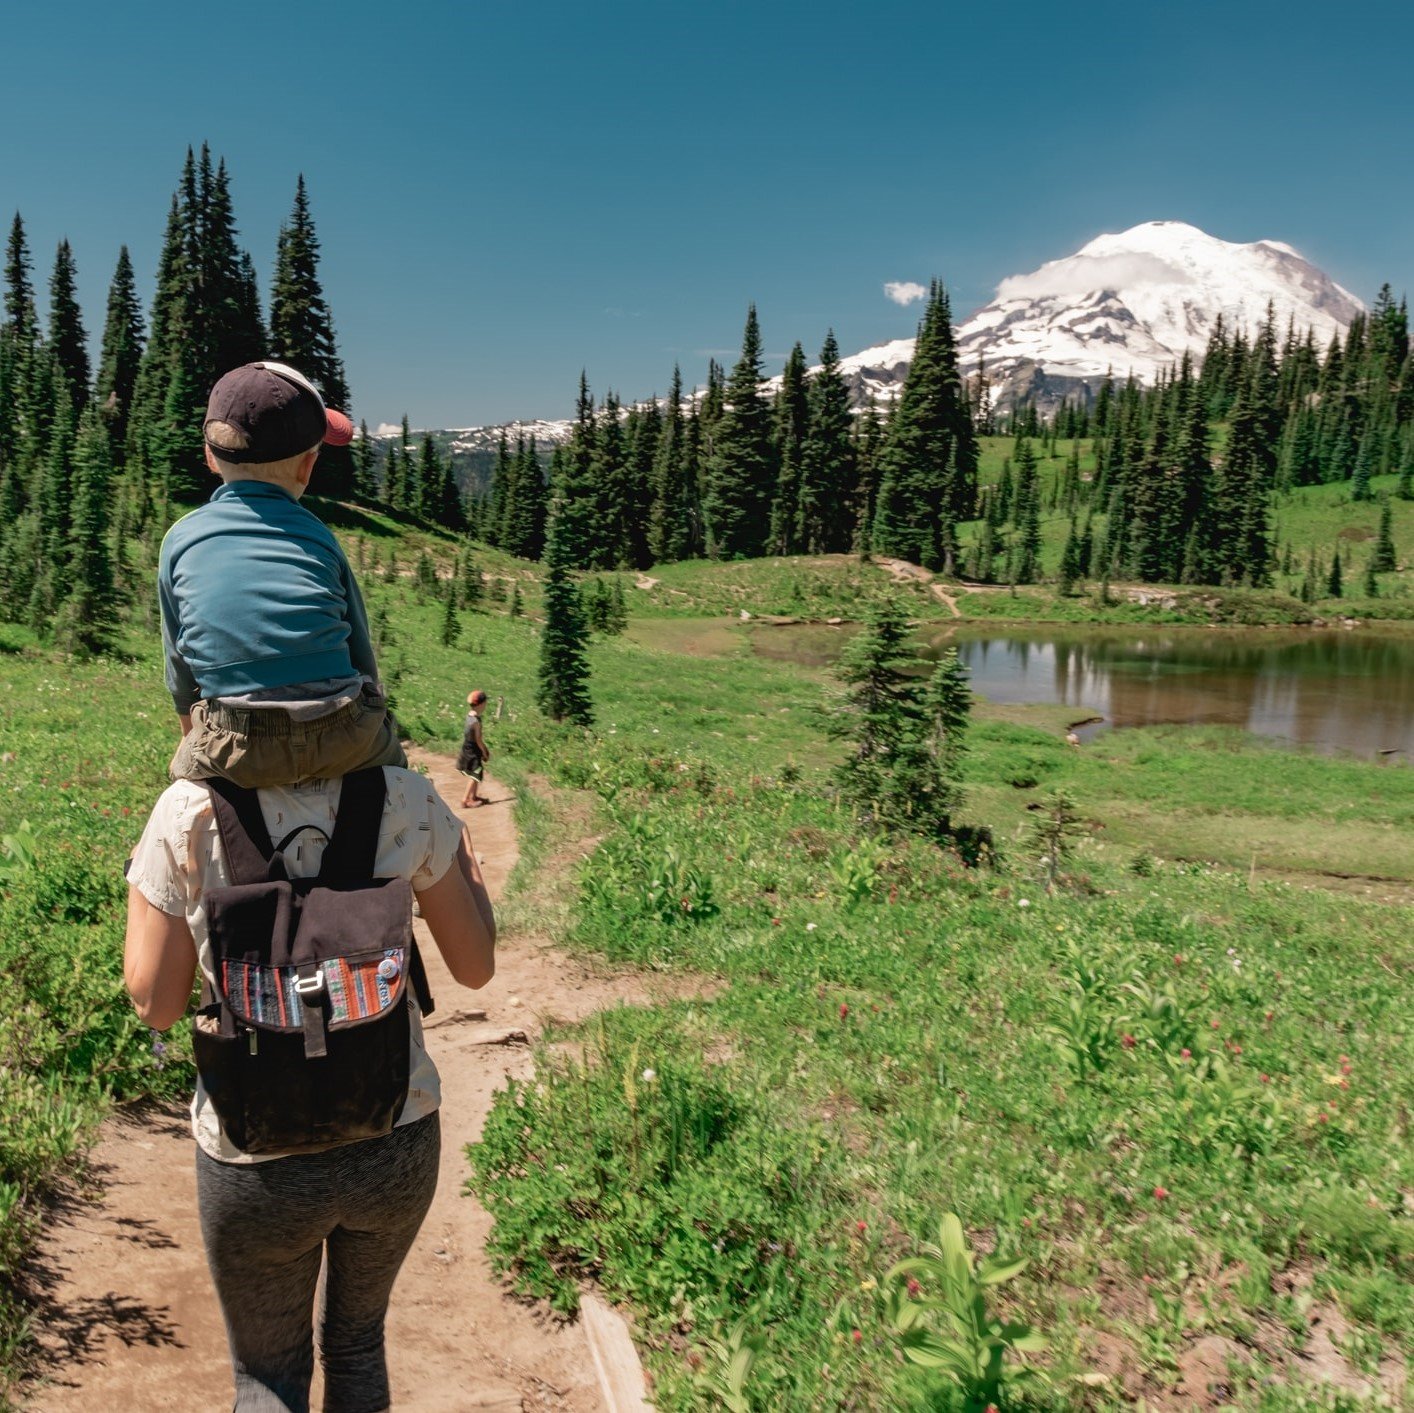 A woman carries a child on her back as she hikes toward Mount Rainier in Washington.